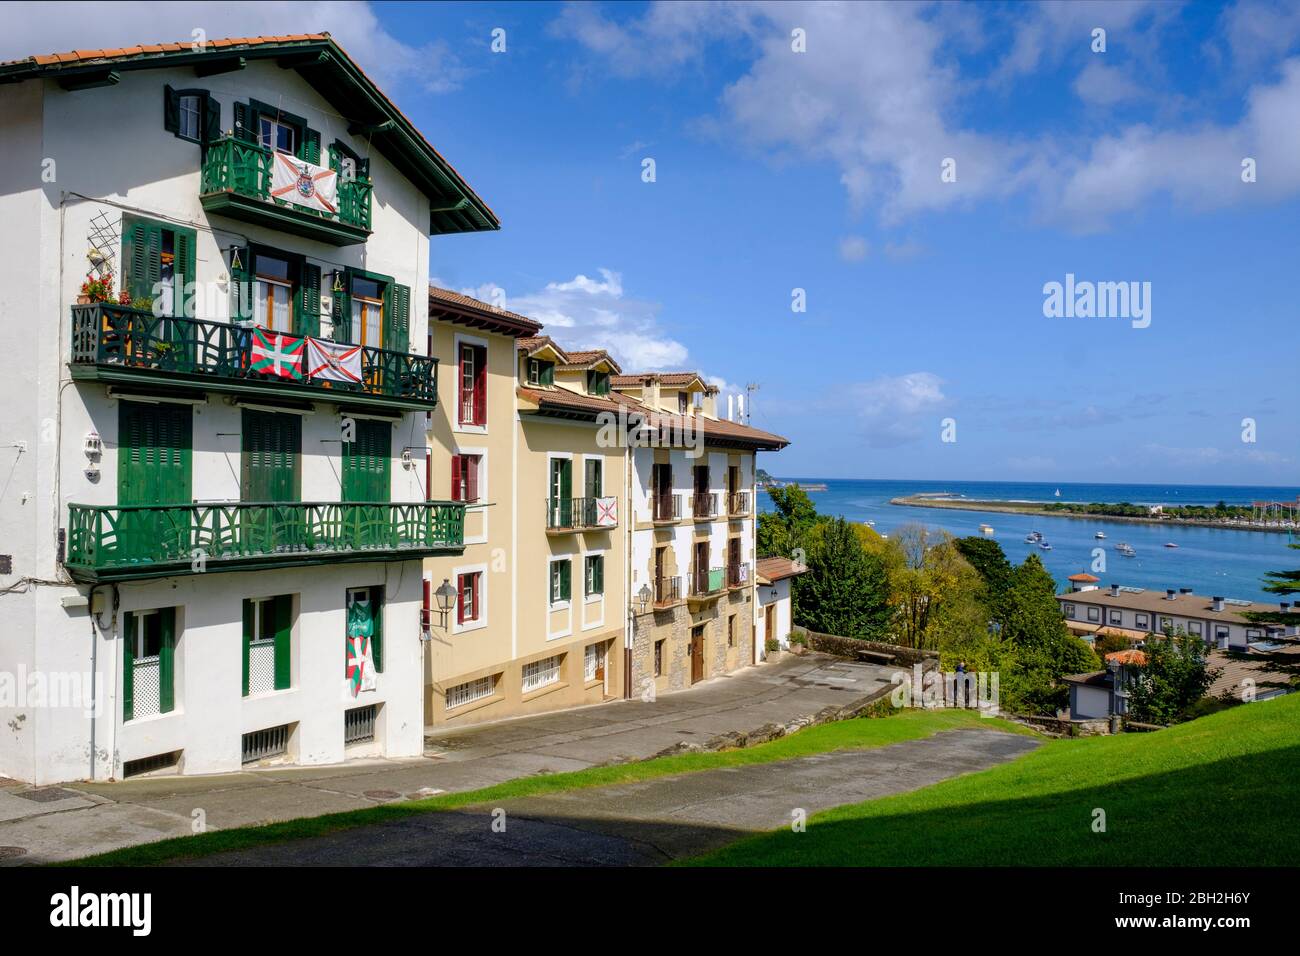 Spain, Gipuzkoa, Hondarribia, Footpath in front of town houses Stock Photo